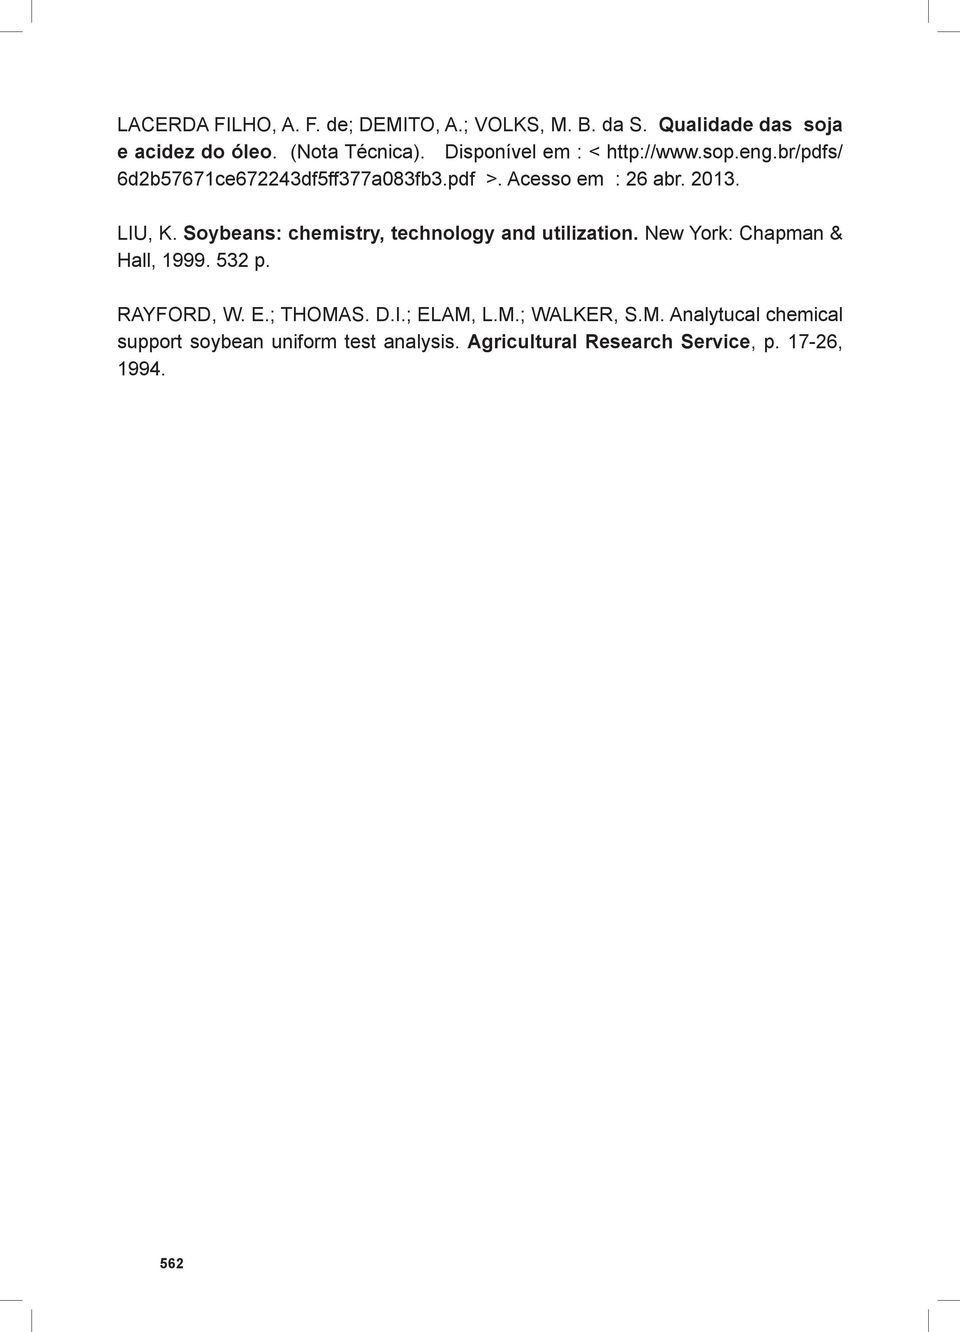 Soybeans: chemistry, technology and utilization. New York: Chapman & Hall, 1999. 532 p. RAYFORD, W. E.; THOMAS. D.I.